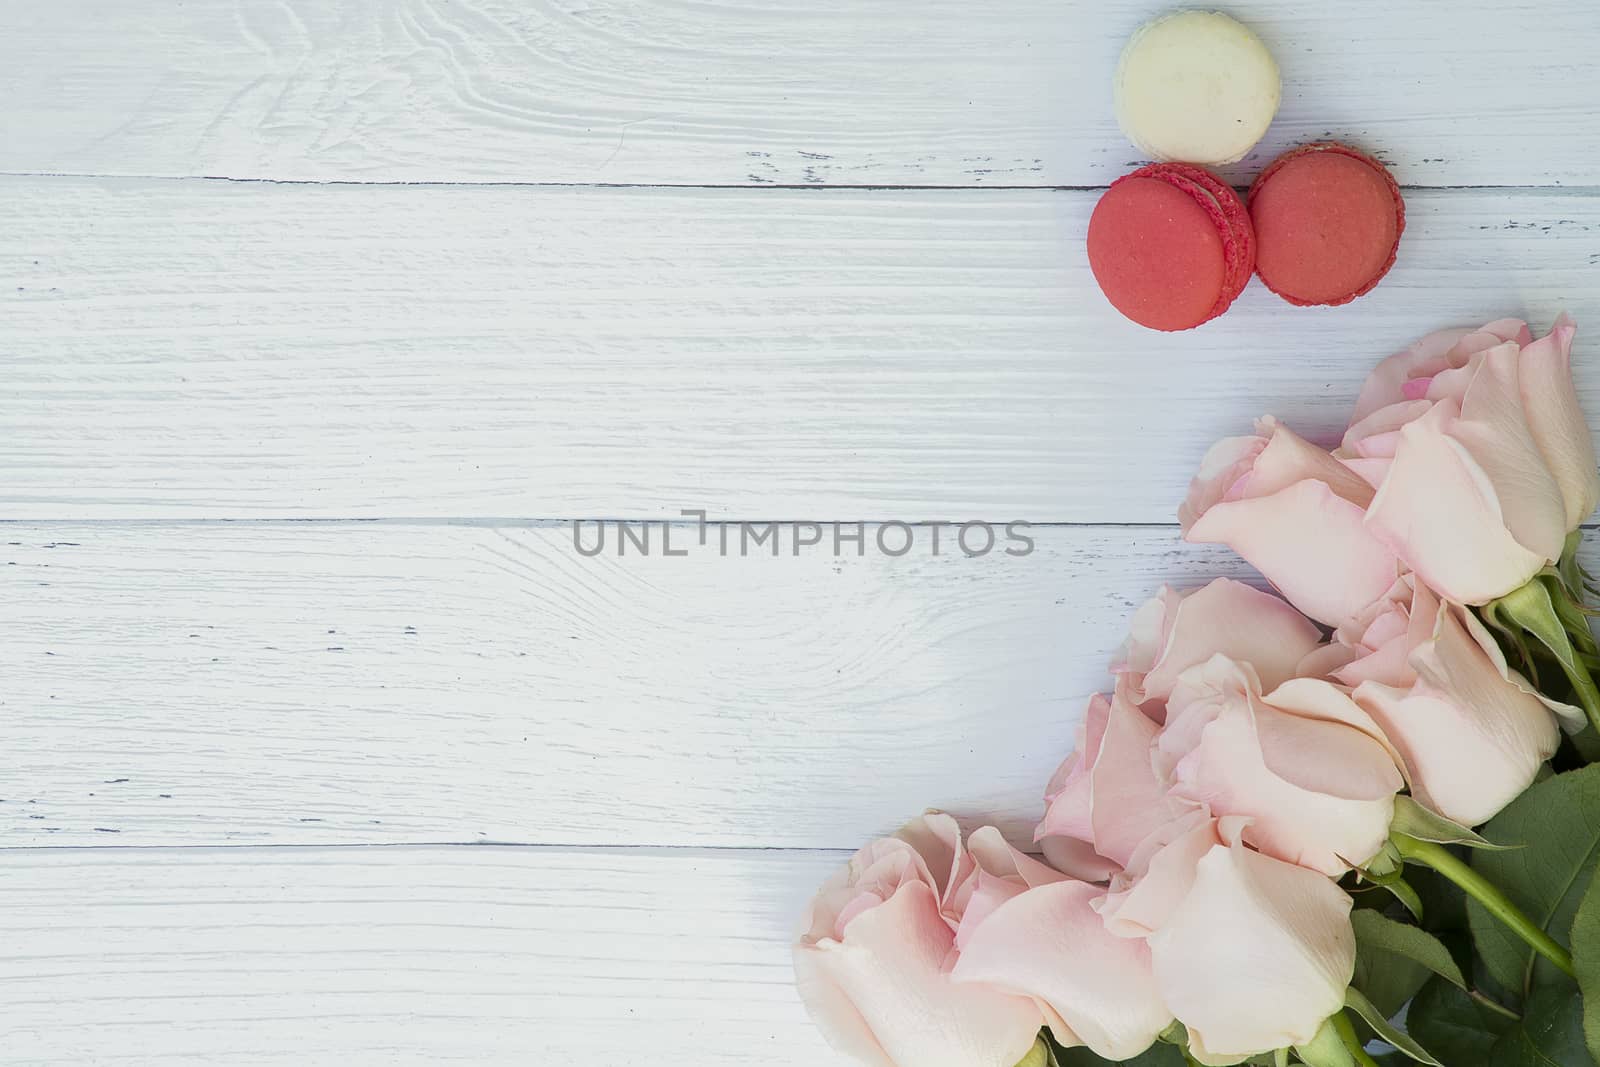 Beautiful bouquet of soft pink roses and pieces of macaroon on wood background. Love, Romance, Valentine's, Anniversary.